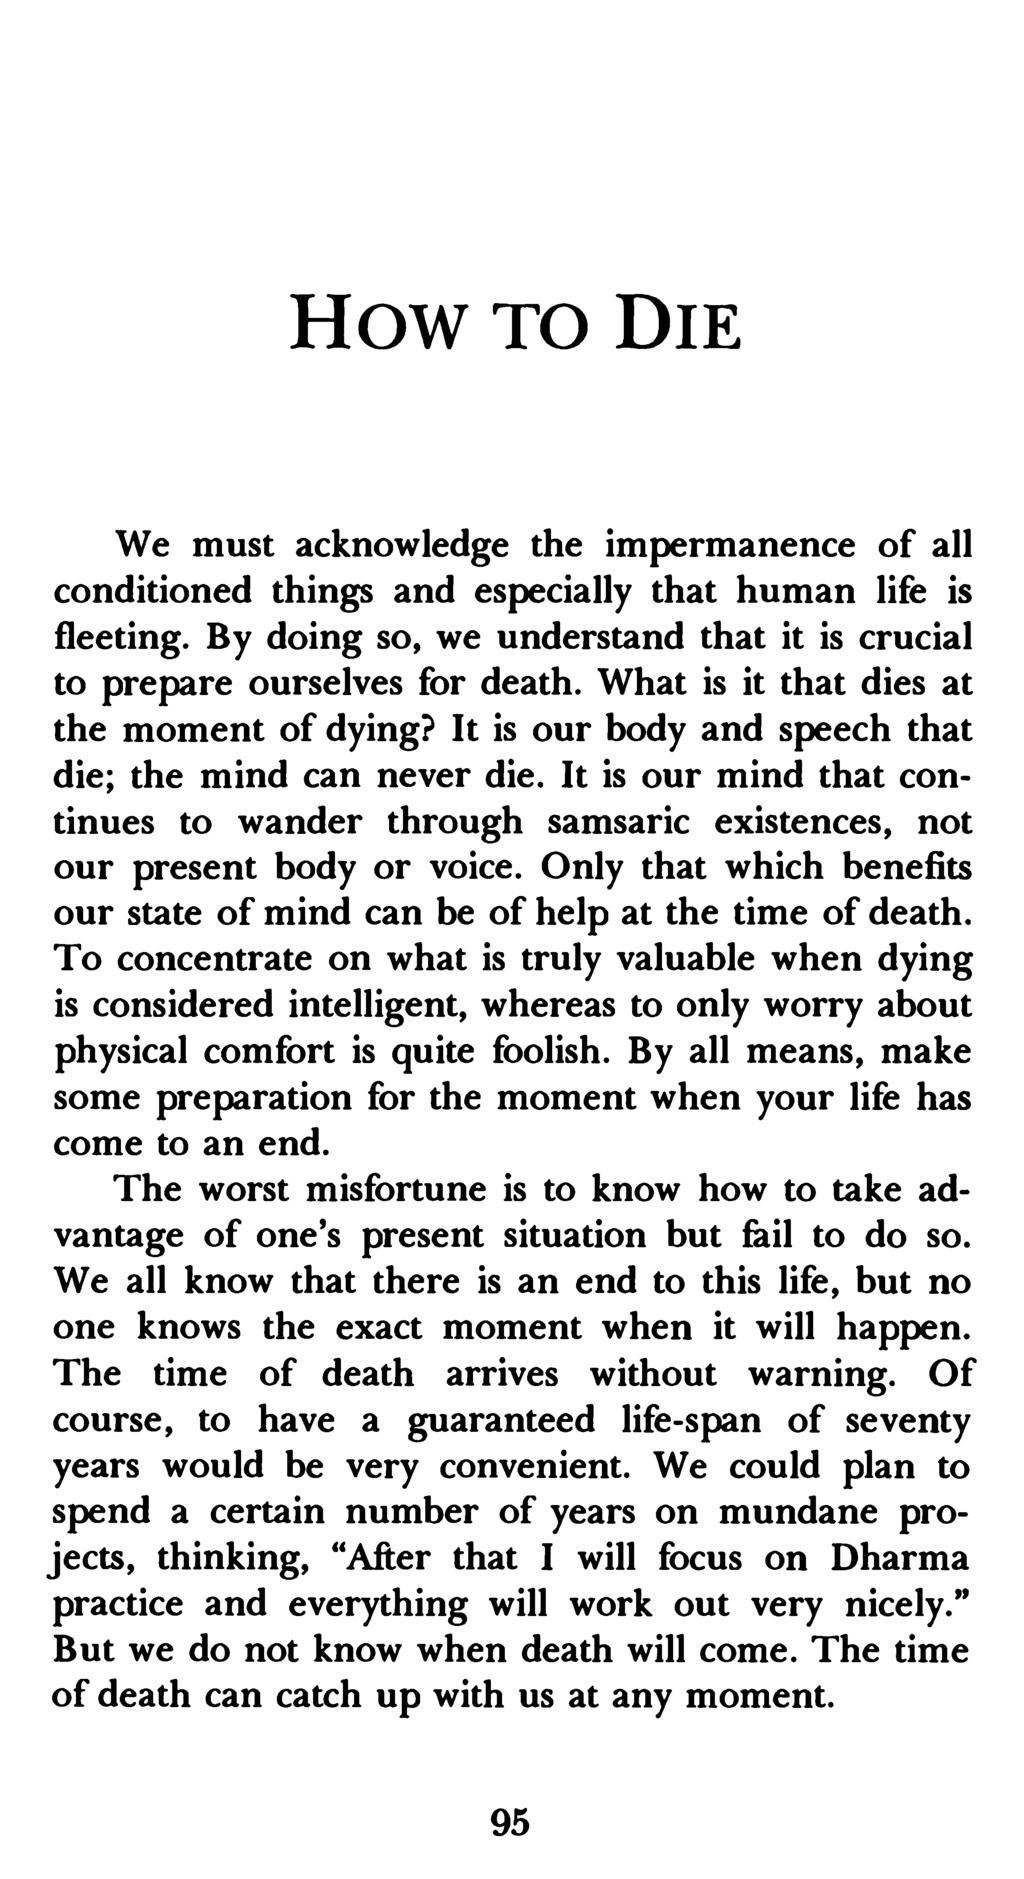 HOW TO DIE We must acknowledge the impermanence of all conditioned things and especially that human life is fleeting. By doing so, we understand that it is crucial to prepare ourselves for death.